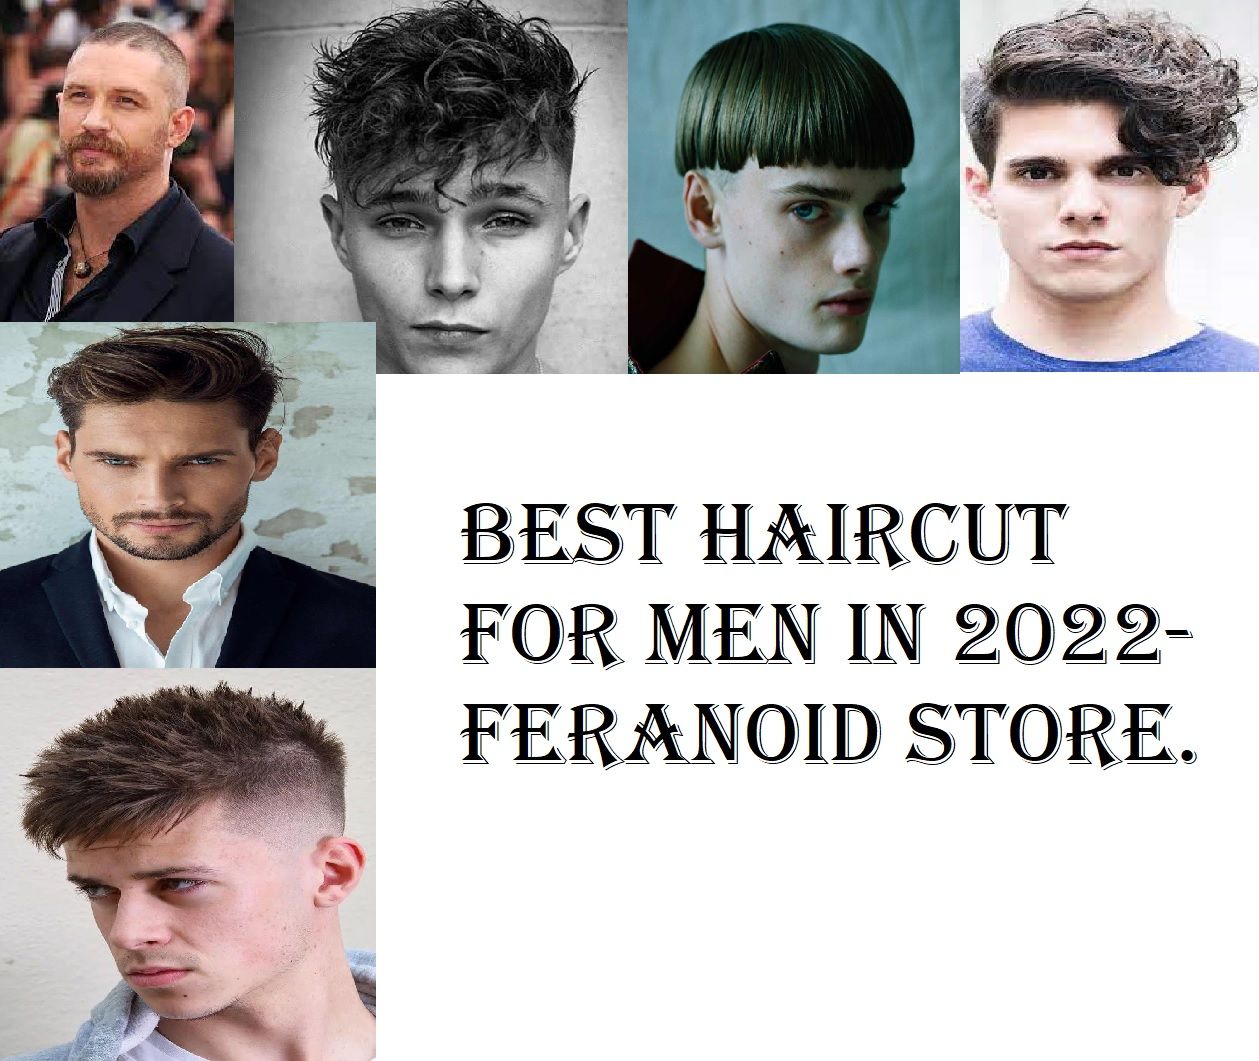 Teen boy haircuts ideas ultimate collection. Pick out the best cut that  flatters your hair type, lifestyle and pe… | Boy hairstyles, Cool hairstyles,  Men hair color